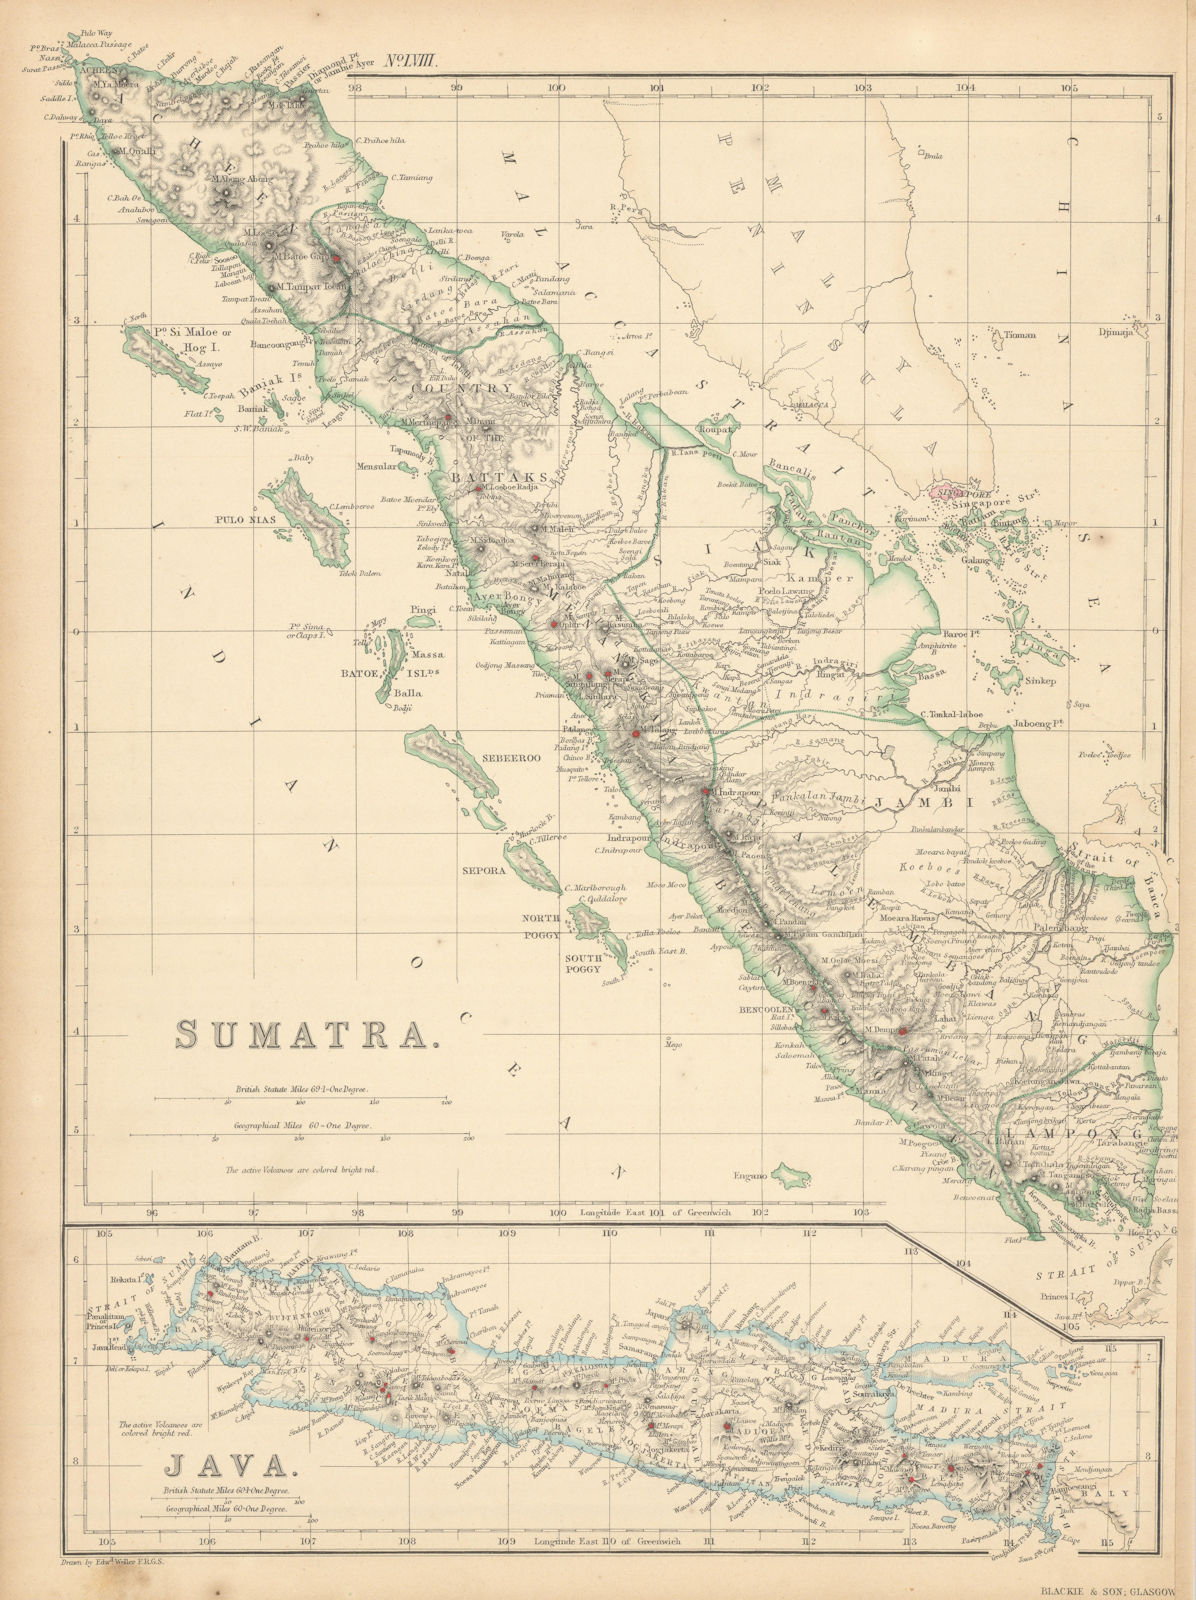 Associate Product Sumatra & Java showing volcanoes by Edward Weller. Indonesia 1859 old map